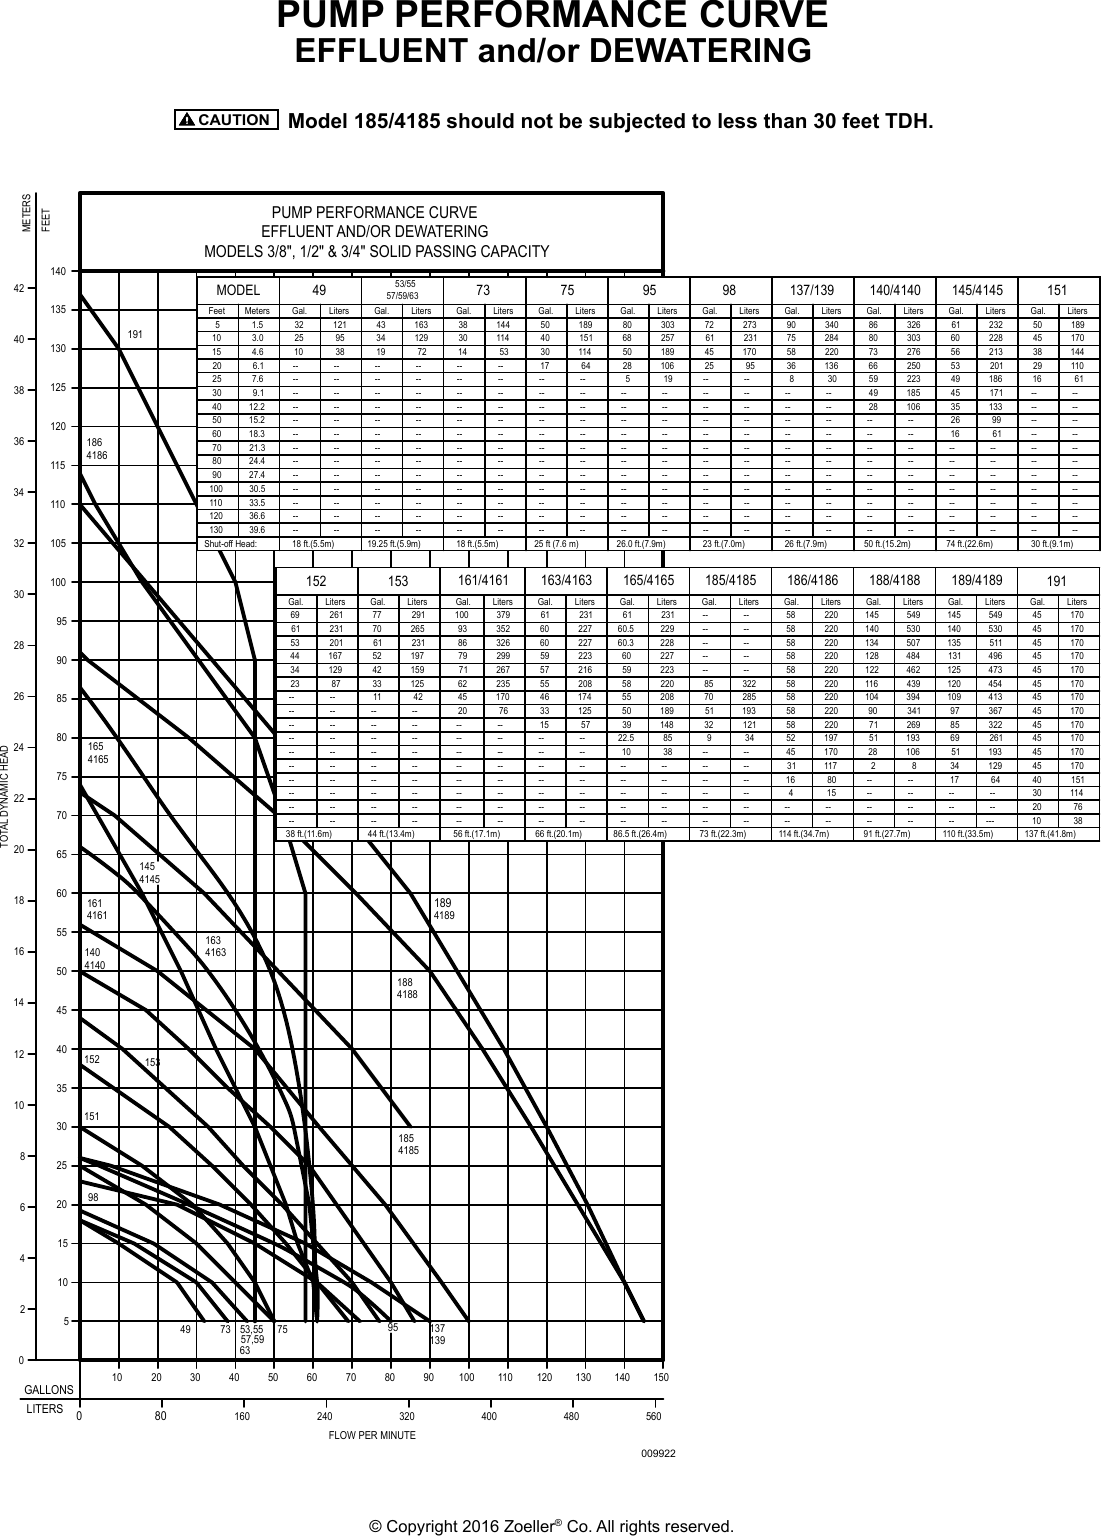 Page 2 of 4 - 212 6 Zoeller 57 Performance Curve User Manual